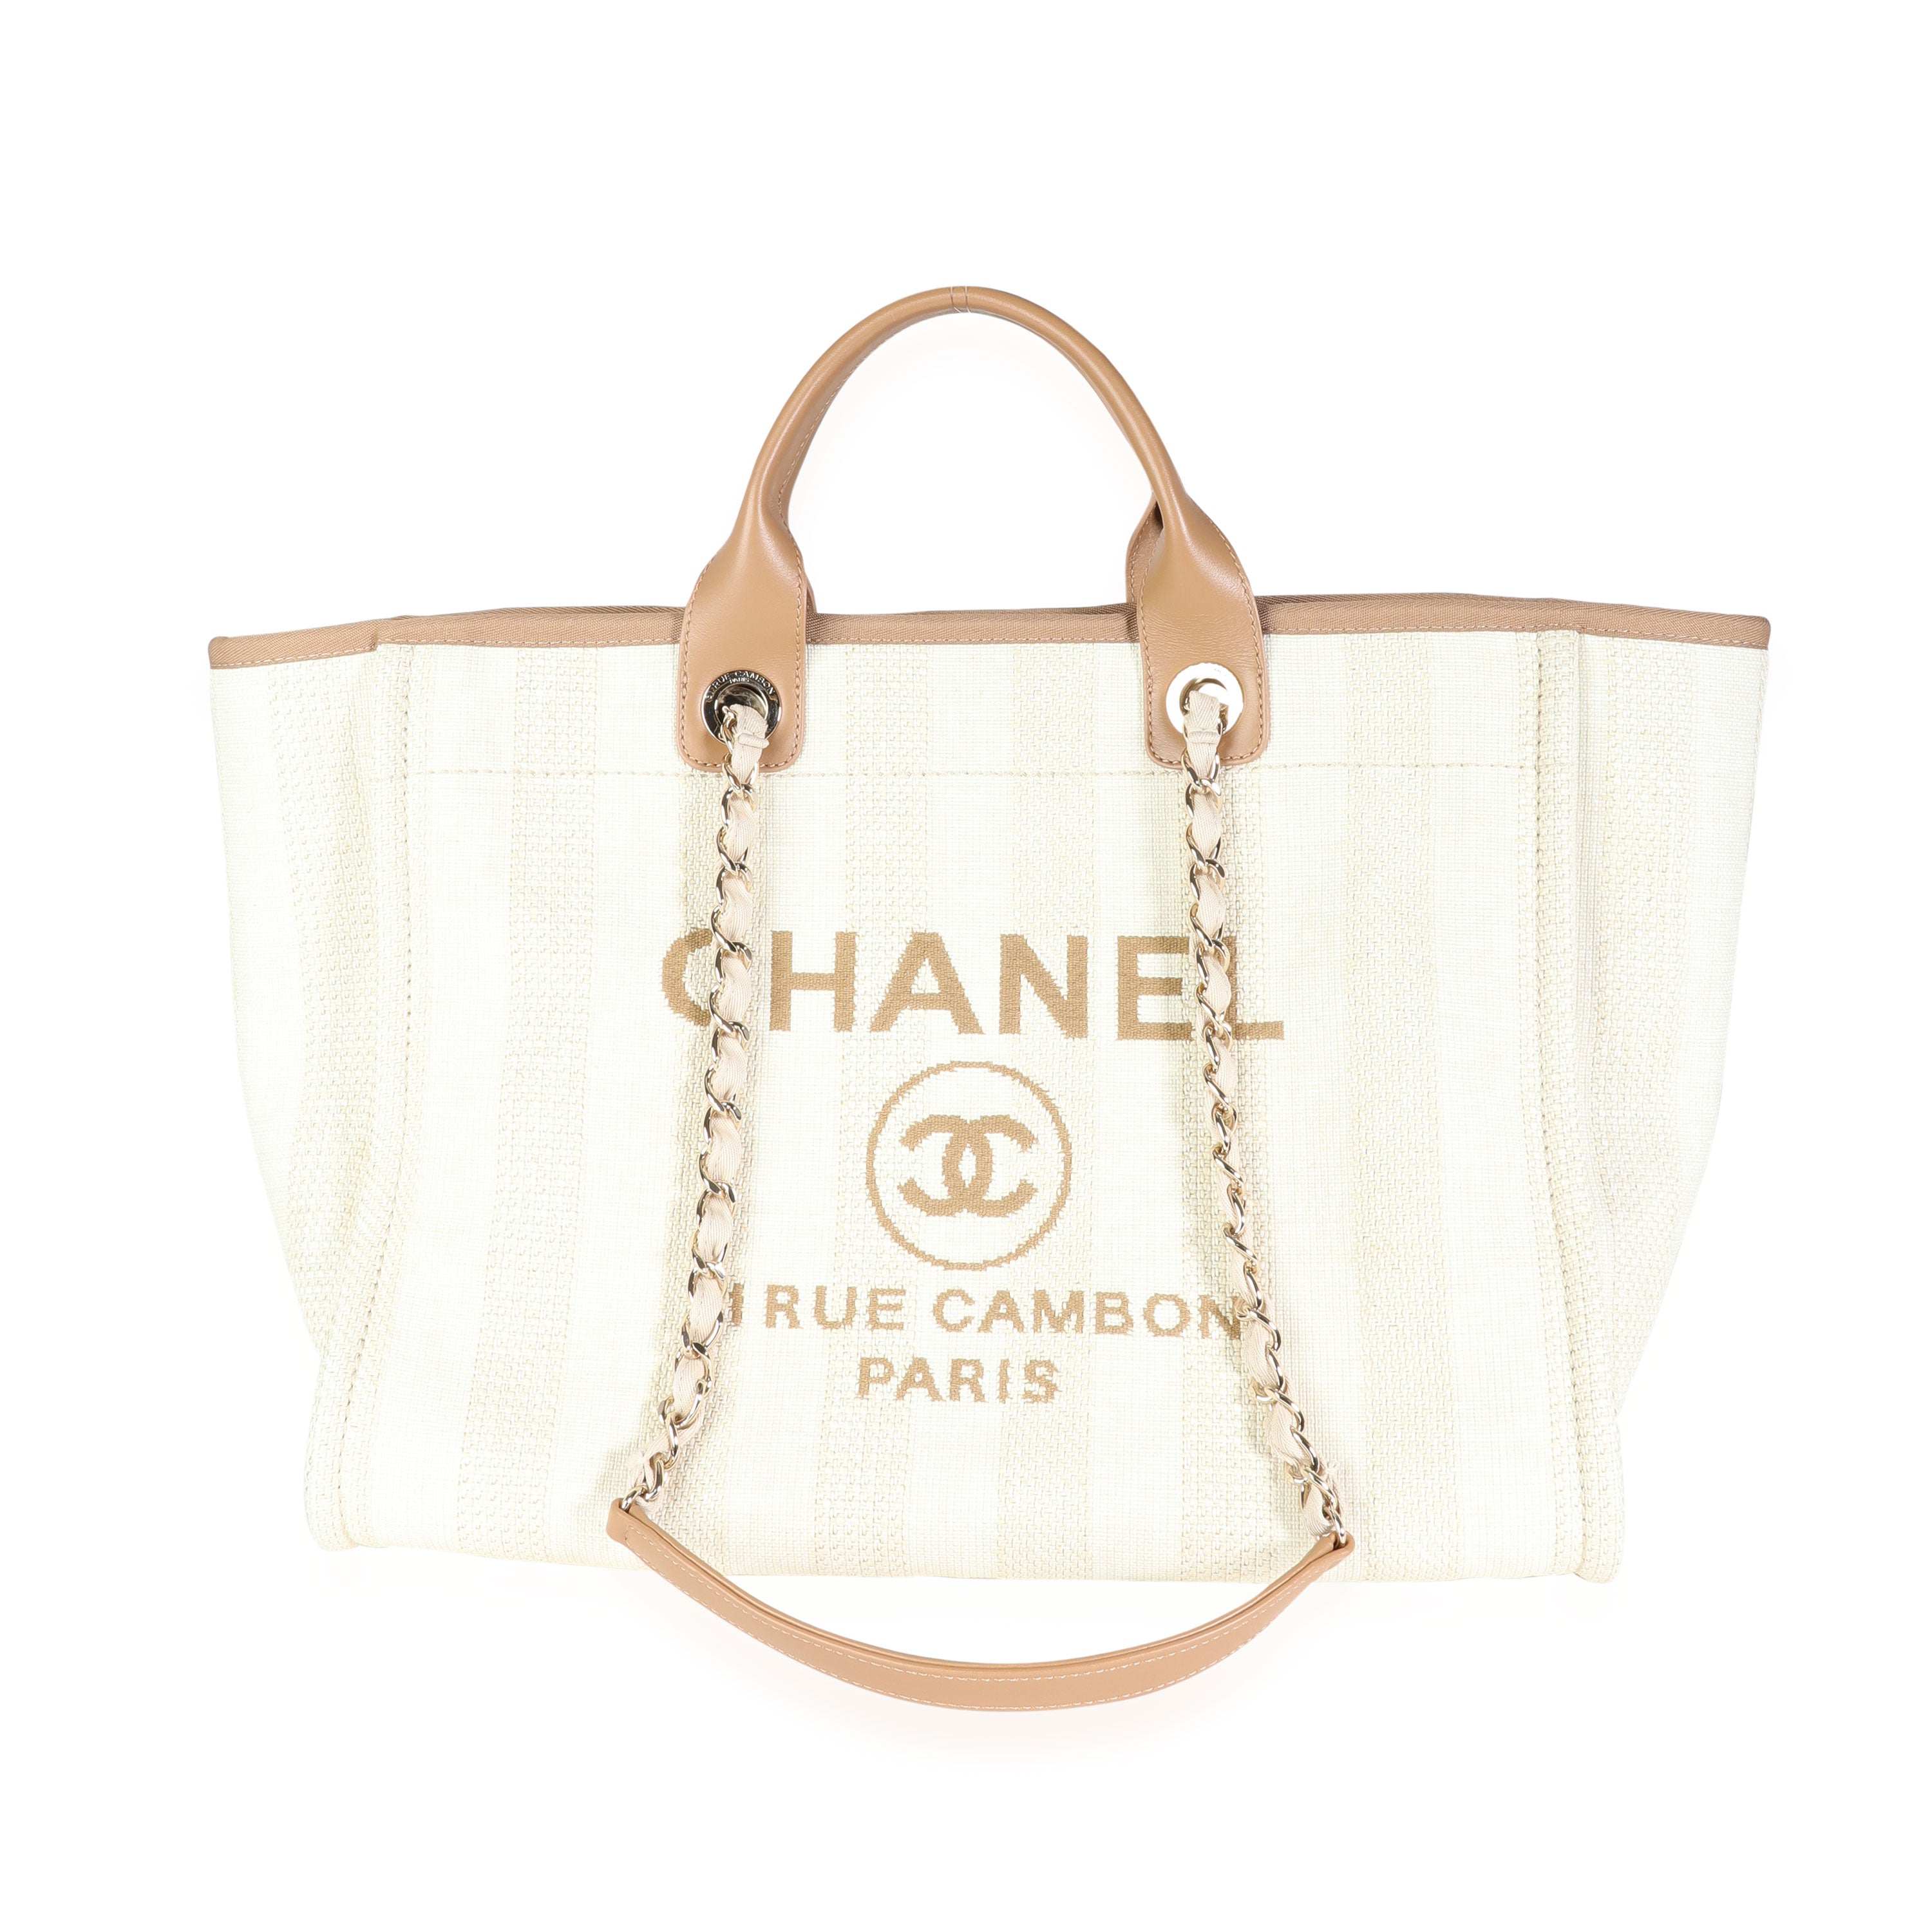 Chanel Deauville Logo Shopping Tote Printed Raffia Large Blue 448632